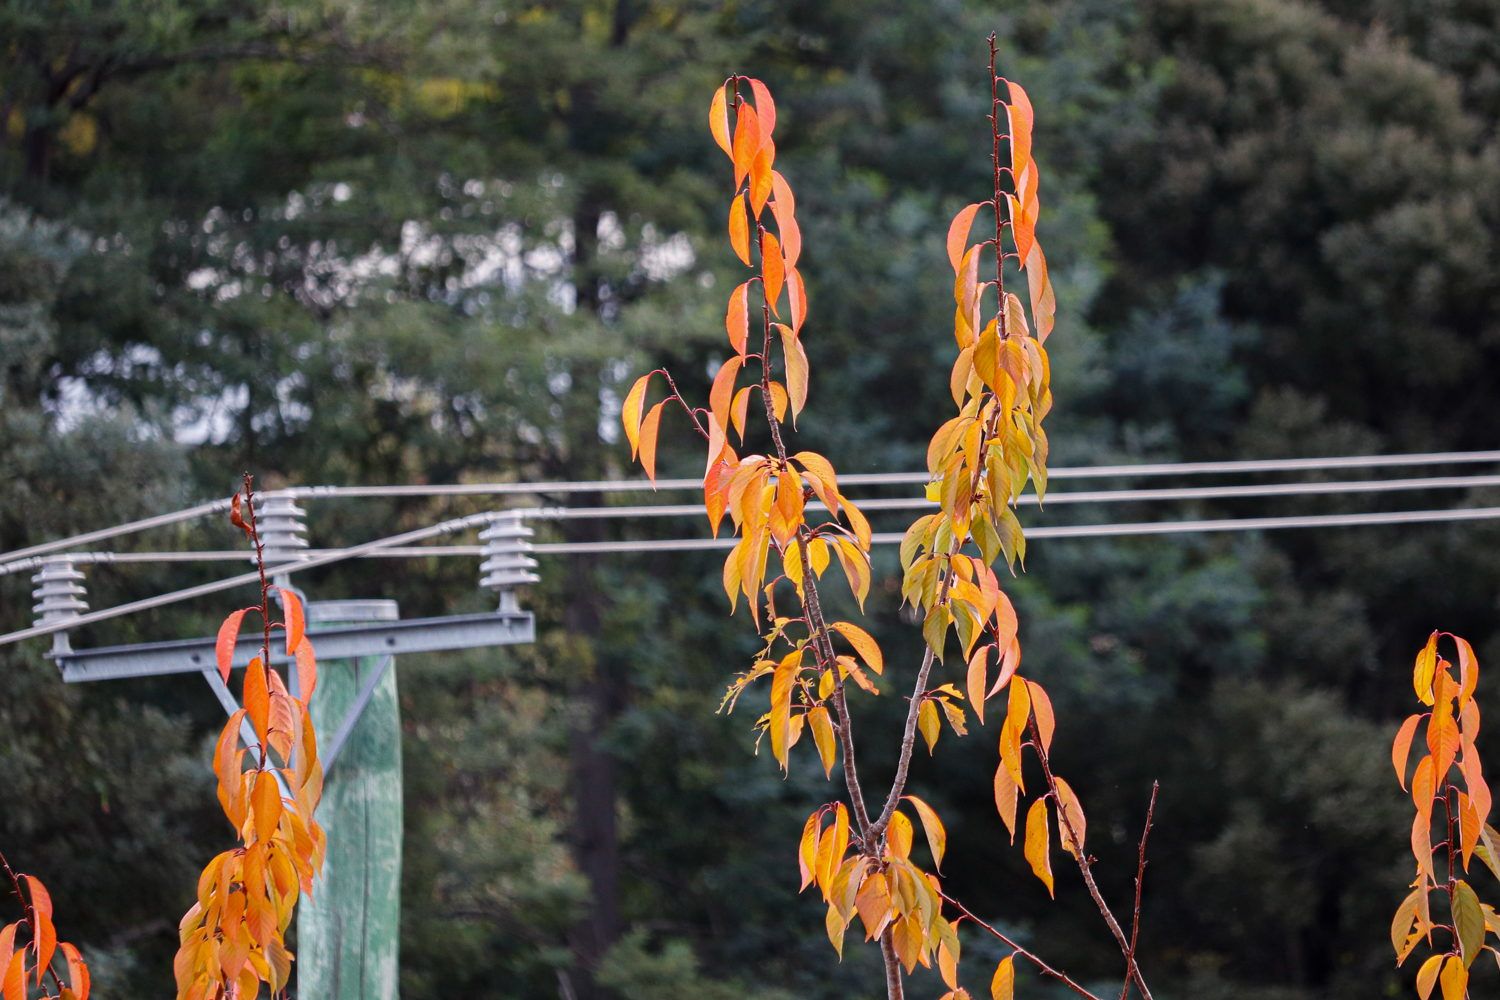 Autumn leaves in the foreground in front of power lines and a power pole